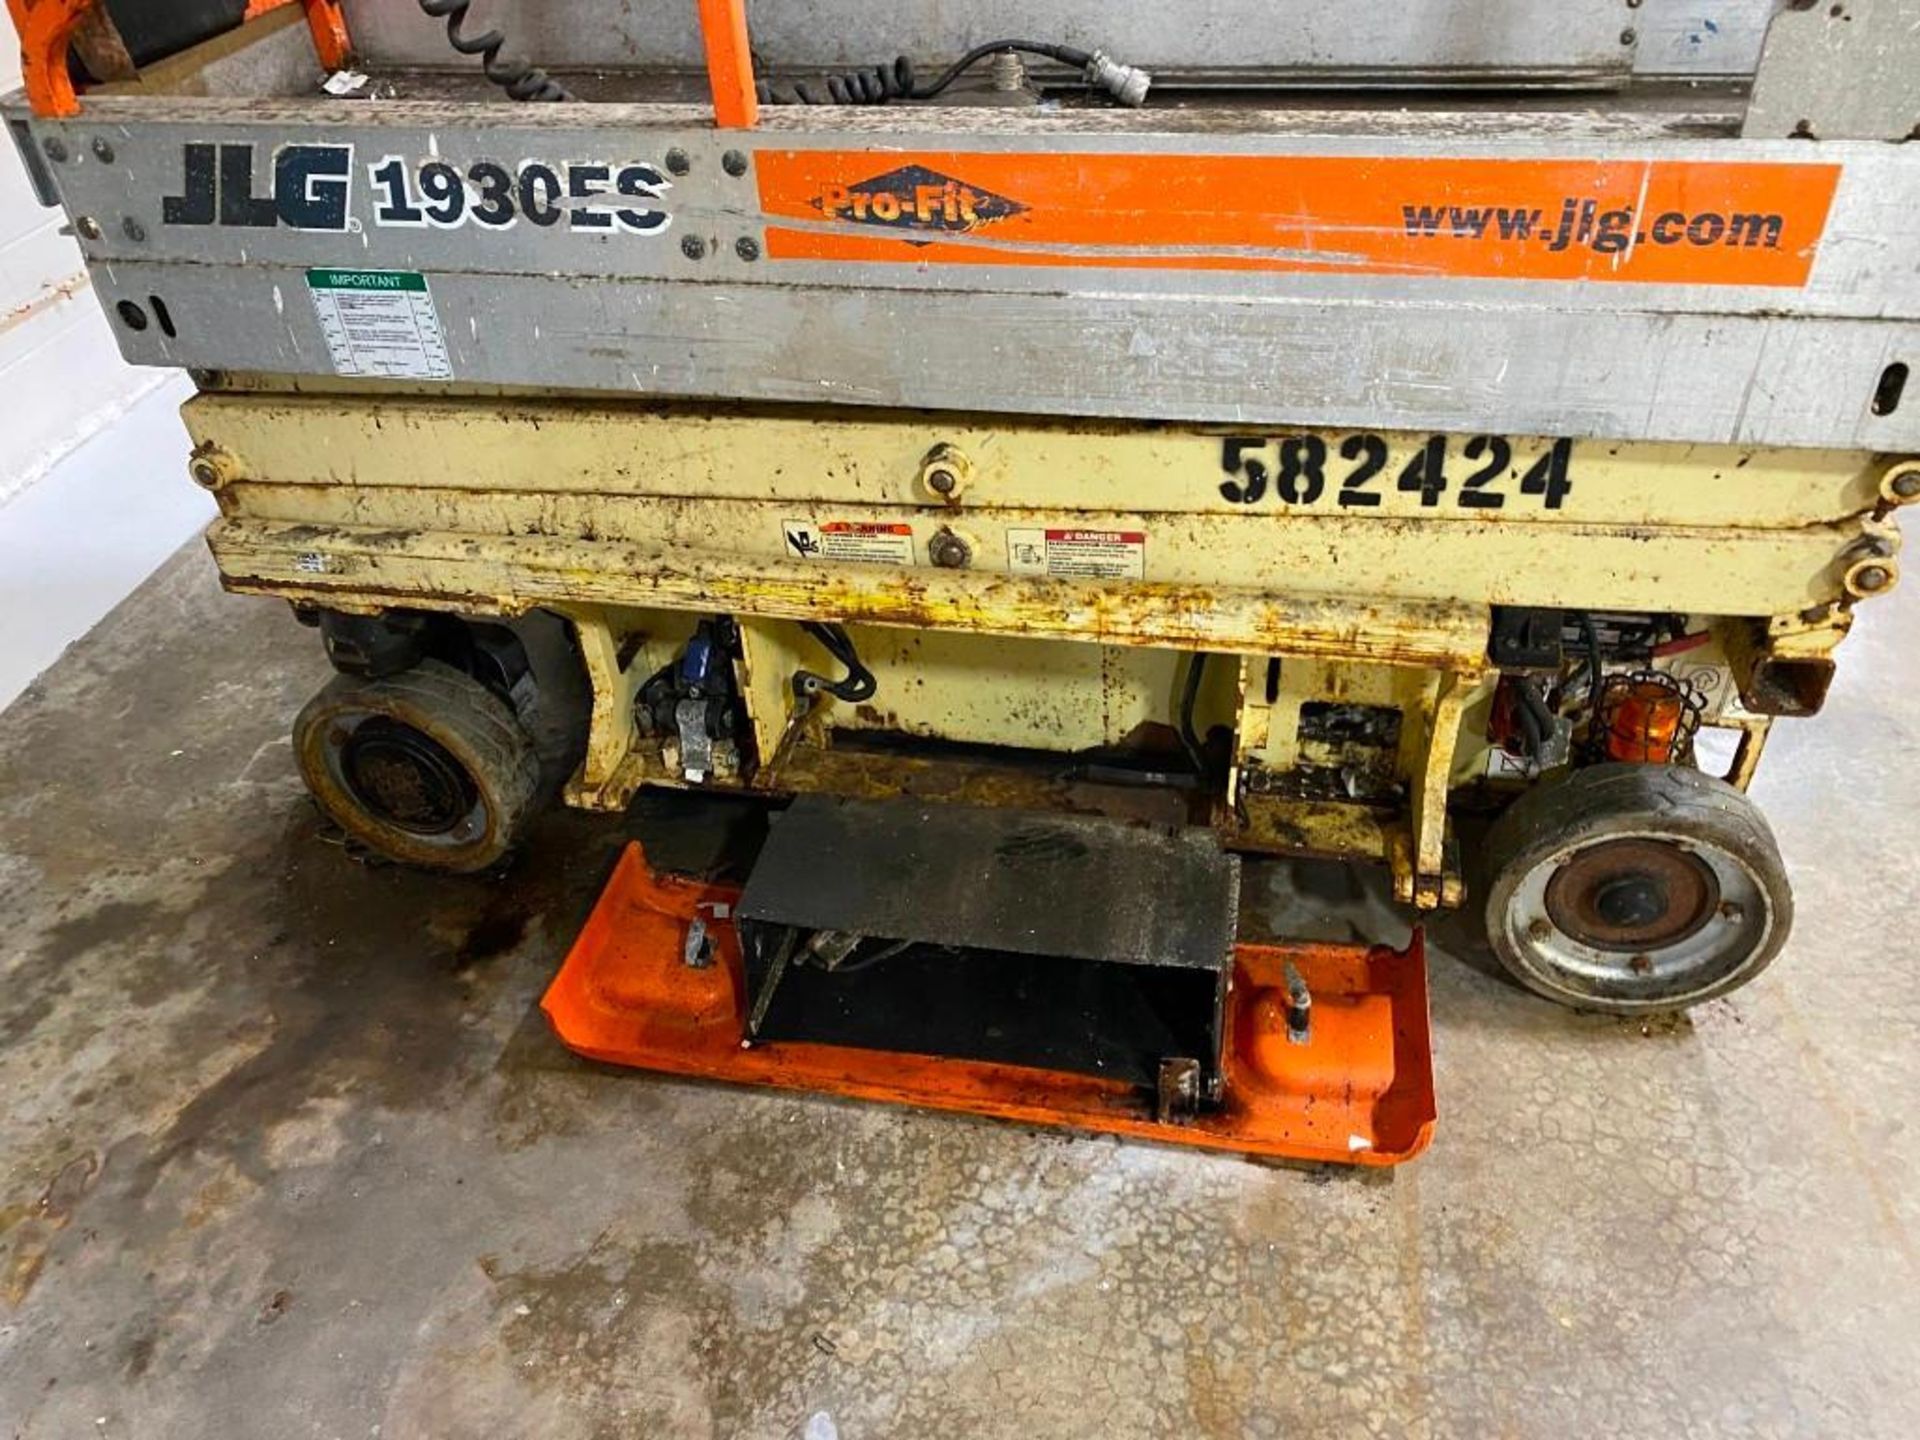 JLG 1930ES PRO FIT SERIES ELECTRIC MANLIFT- NON FUNCTIONAL - Image 3 of 8